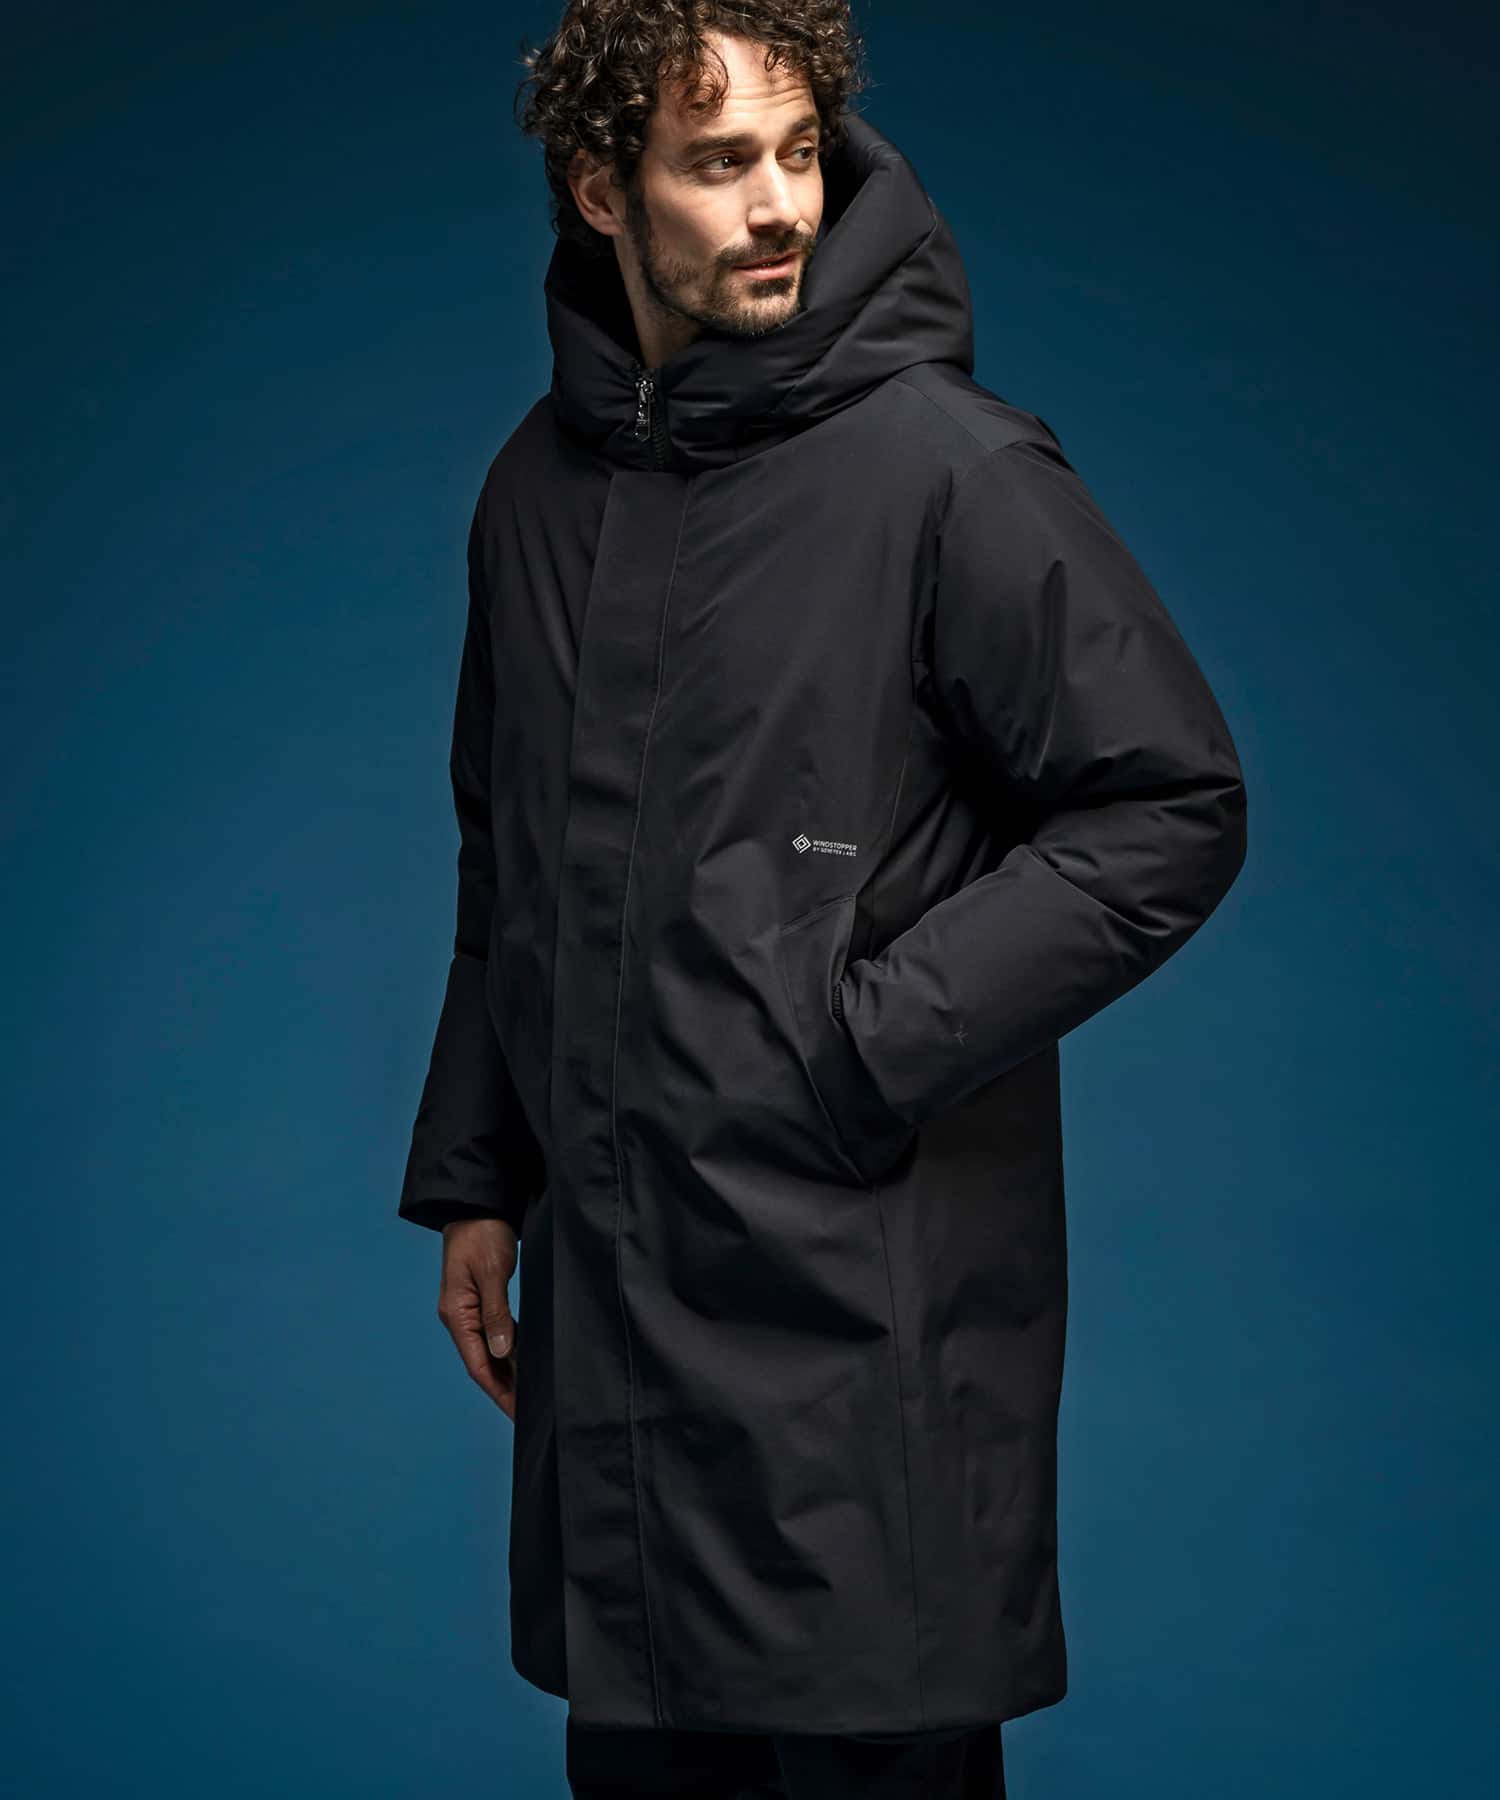 MENS】ダウンコート WINDSTOPPER(R) プロダクト by GORE-TEX LABS